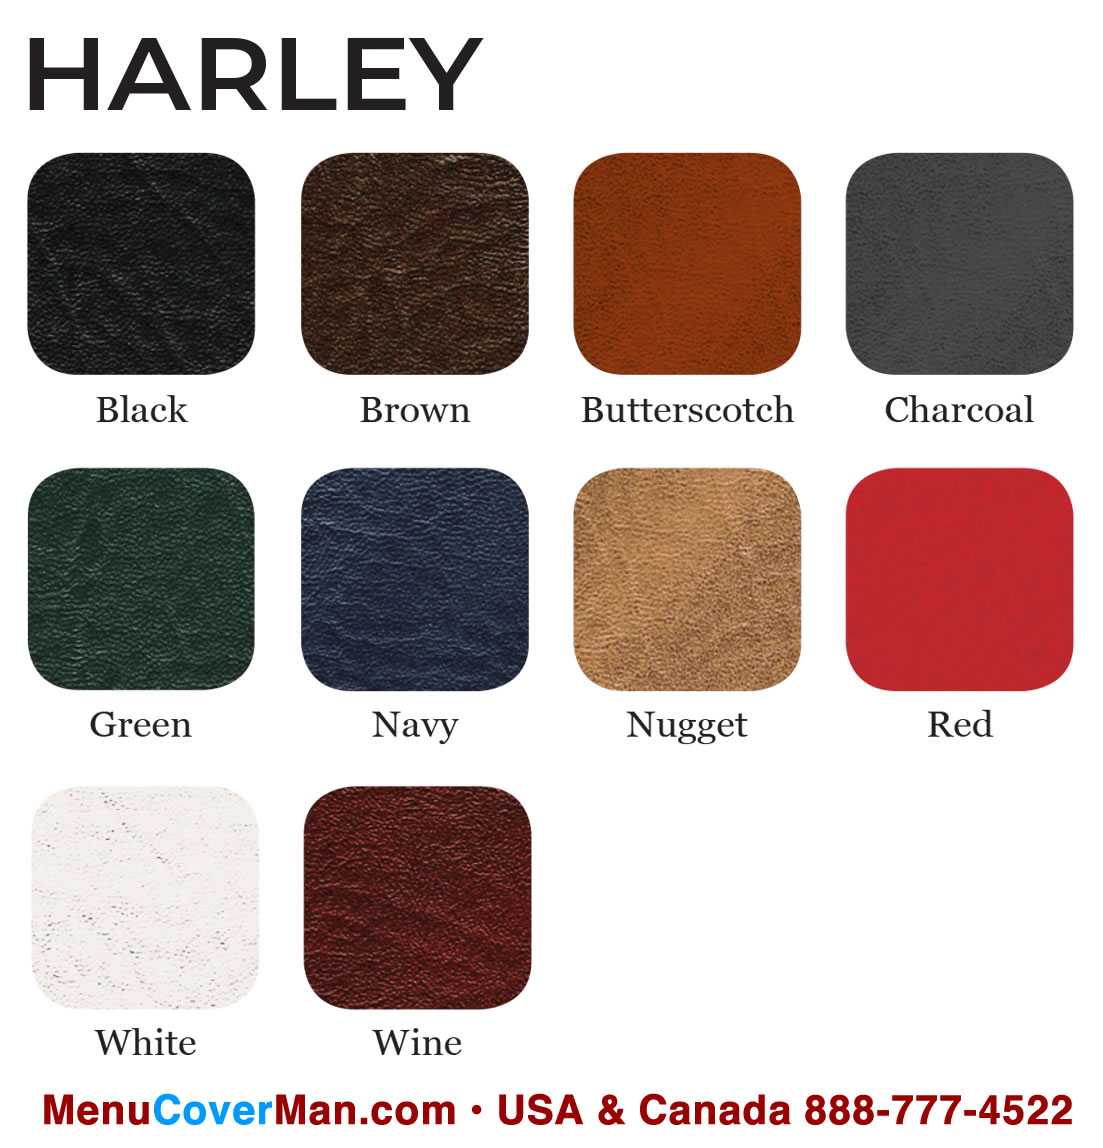 Harley Swatches